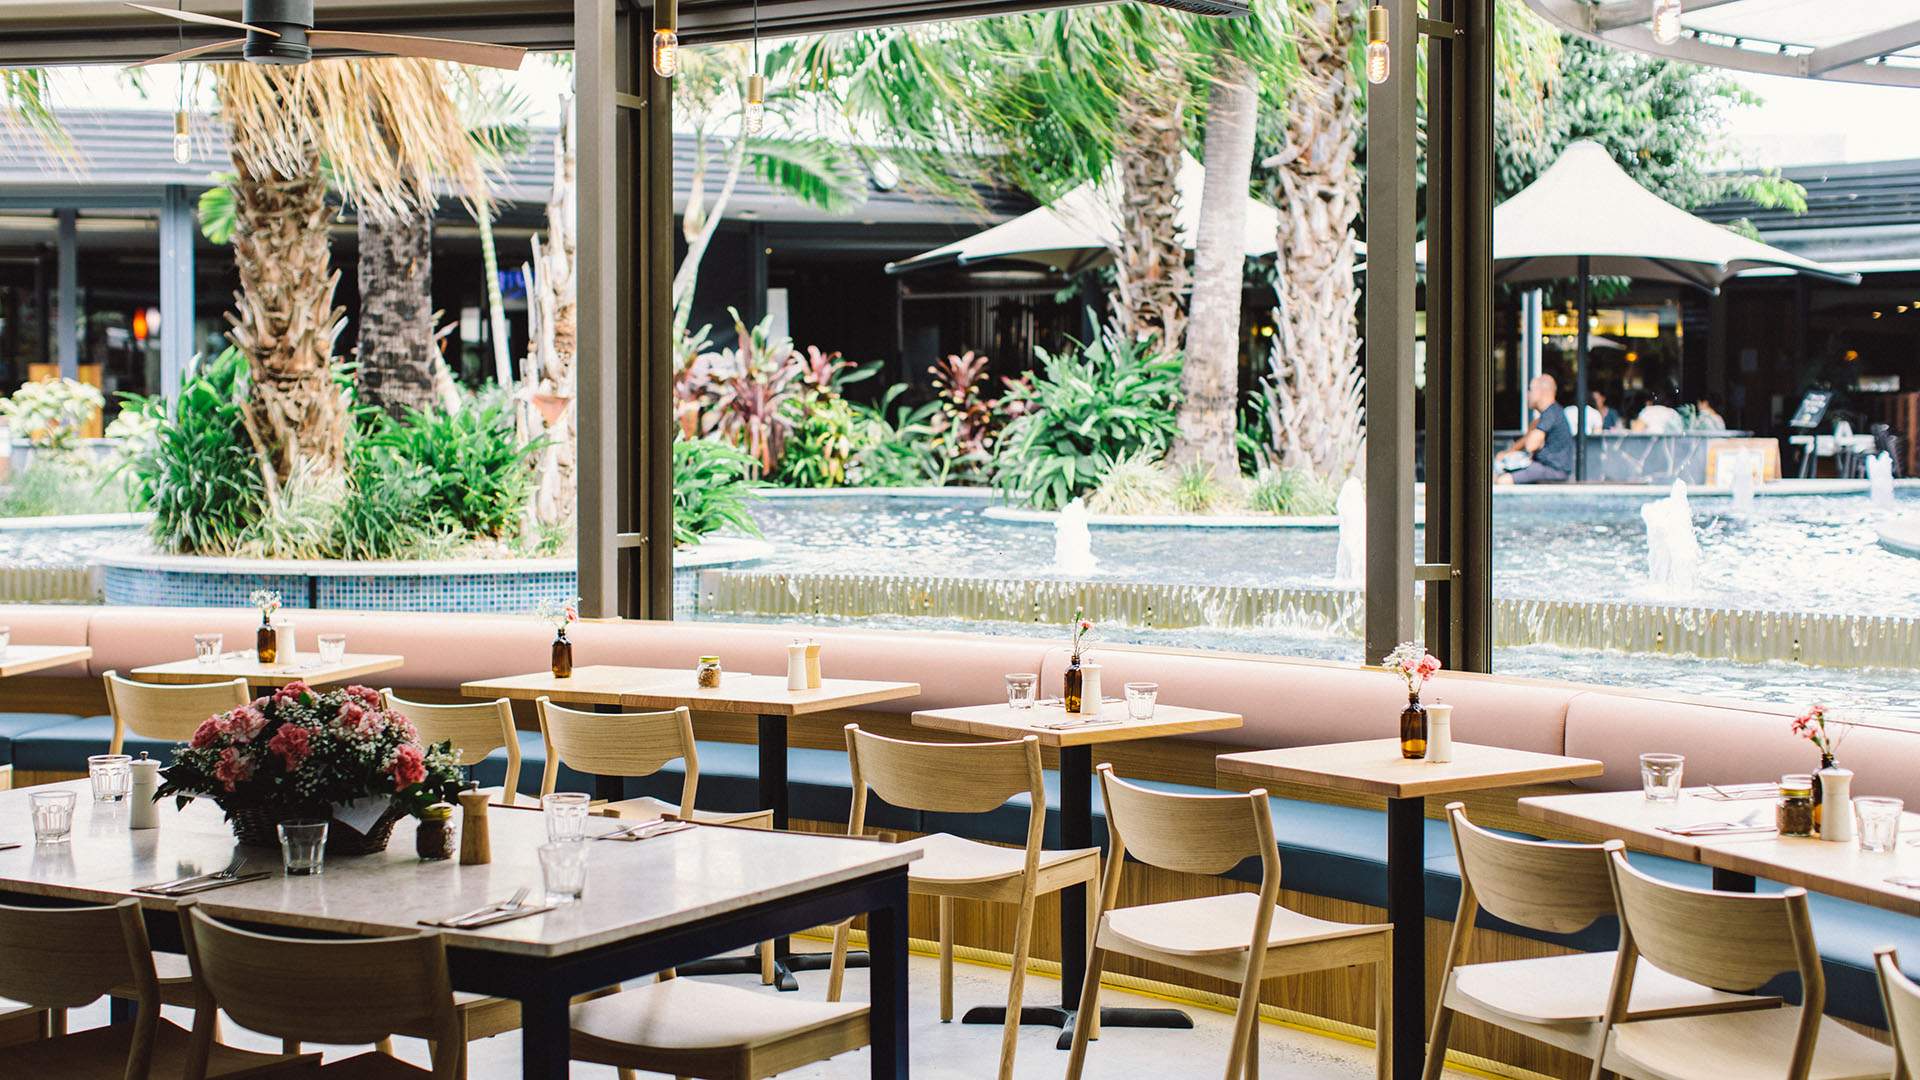 Sydney's Beloved Devon Cafe Has Brought Its All-Day Dining to Brisbane's South